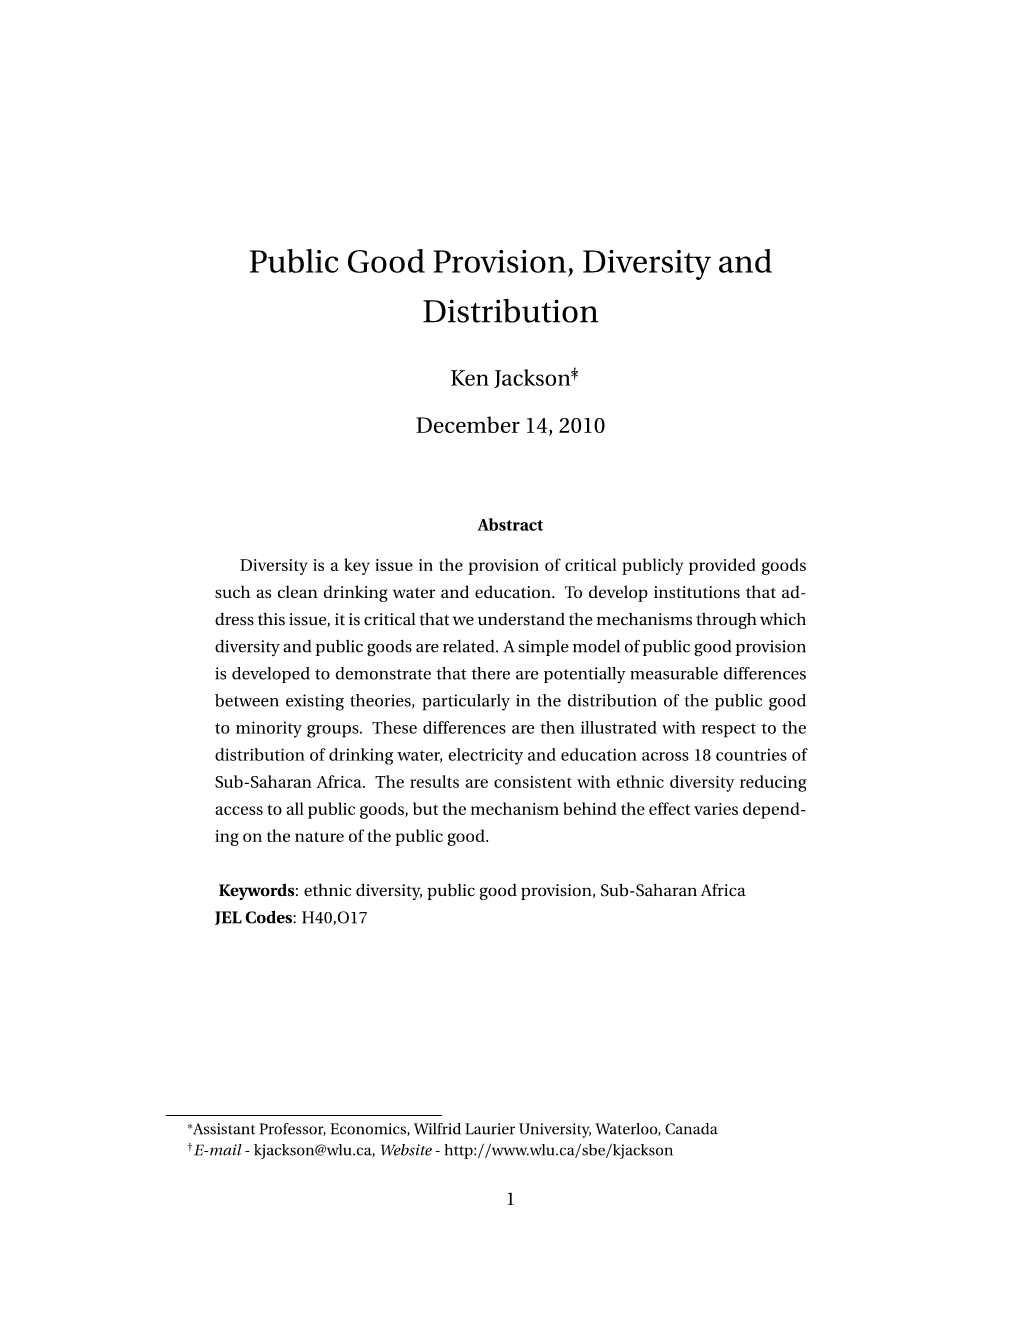 Public Good Provision, Diversity and Distribution